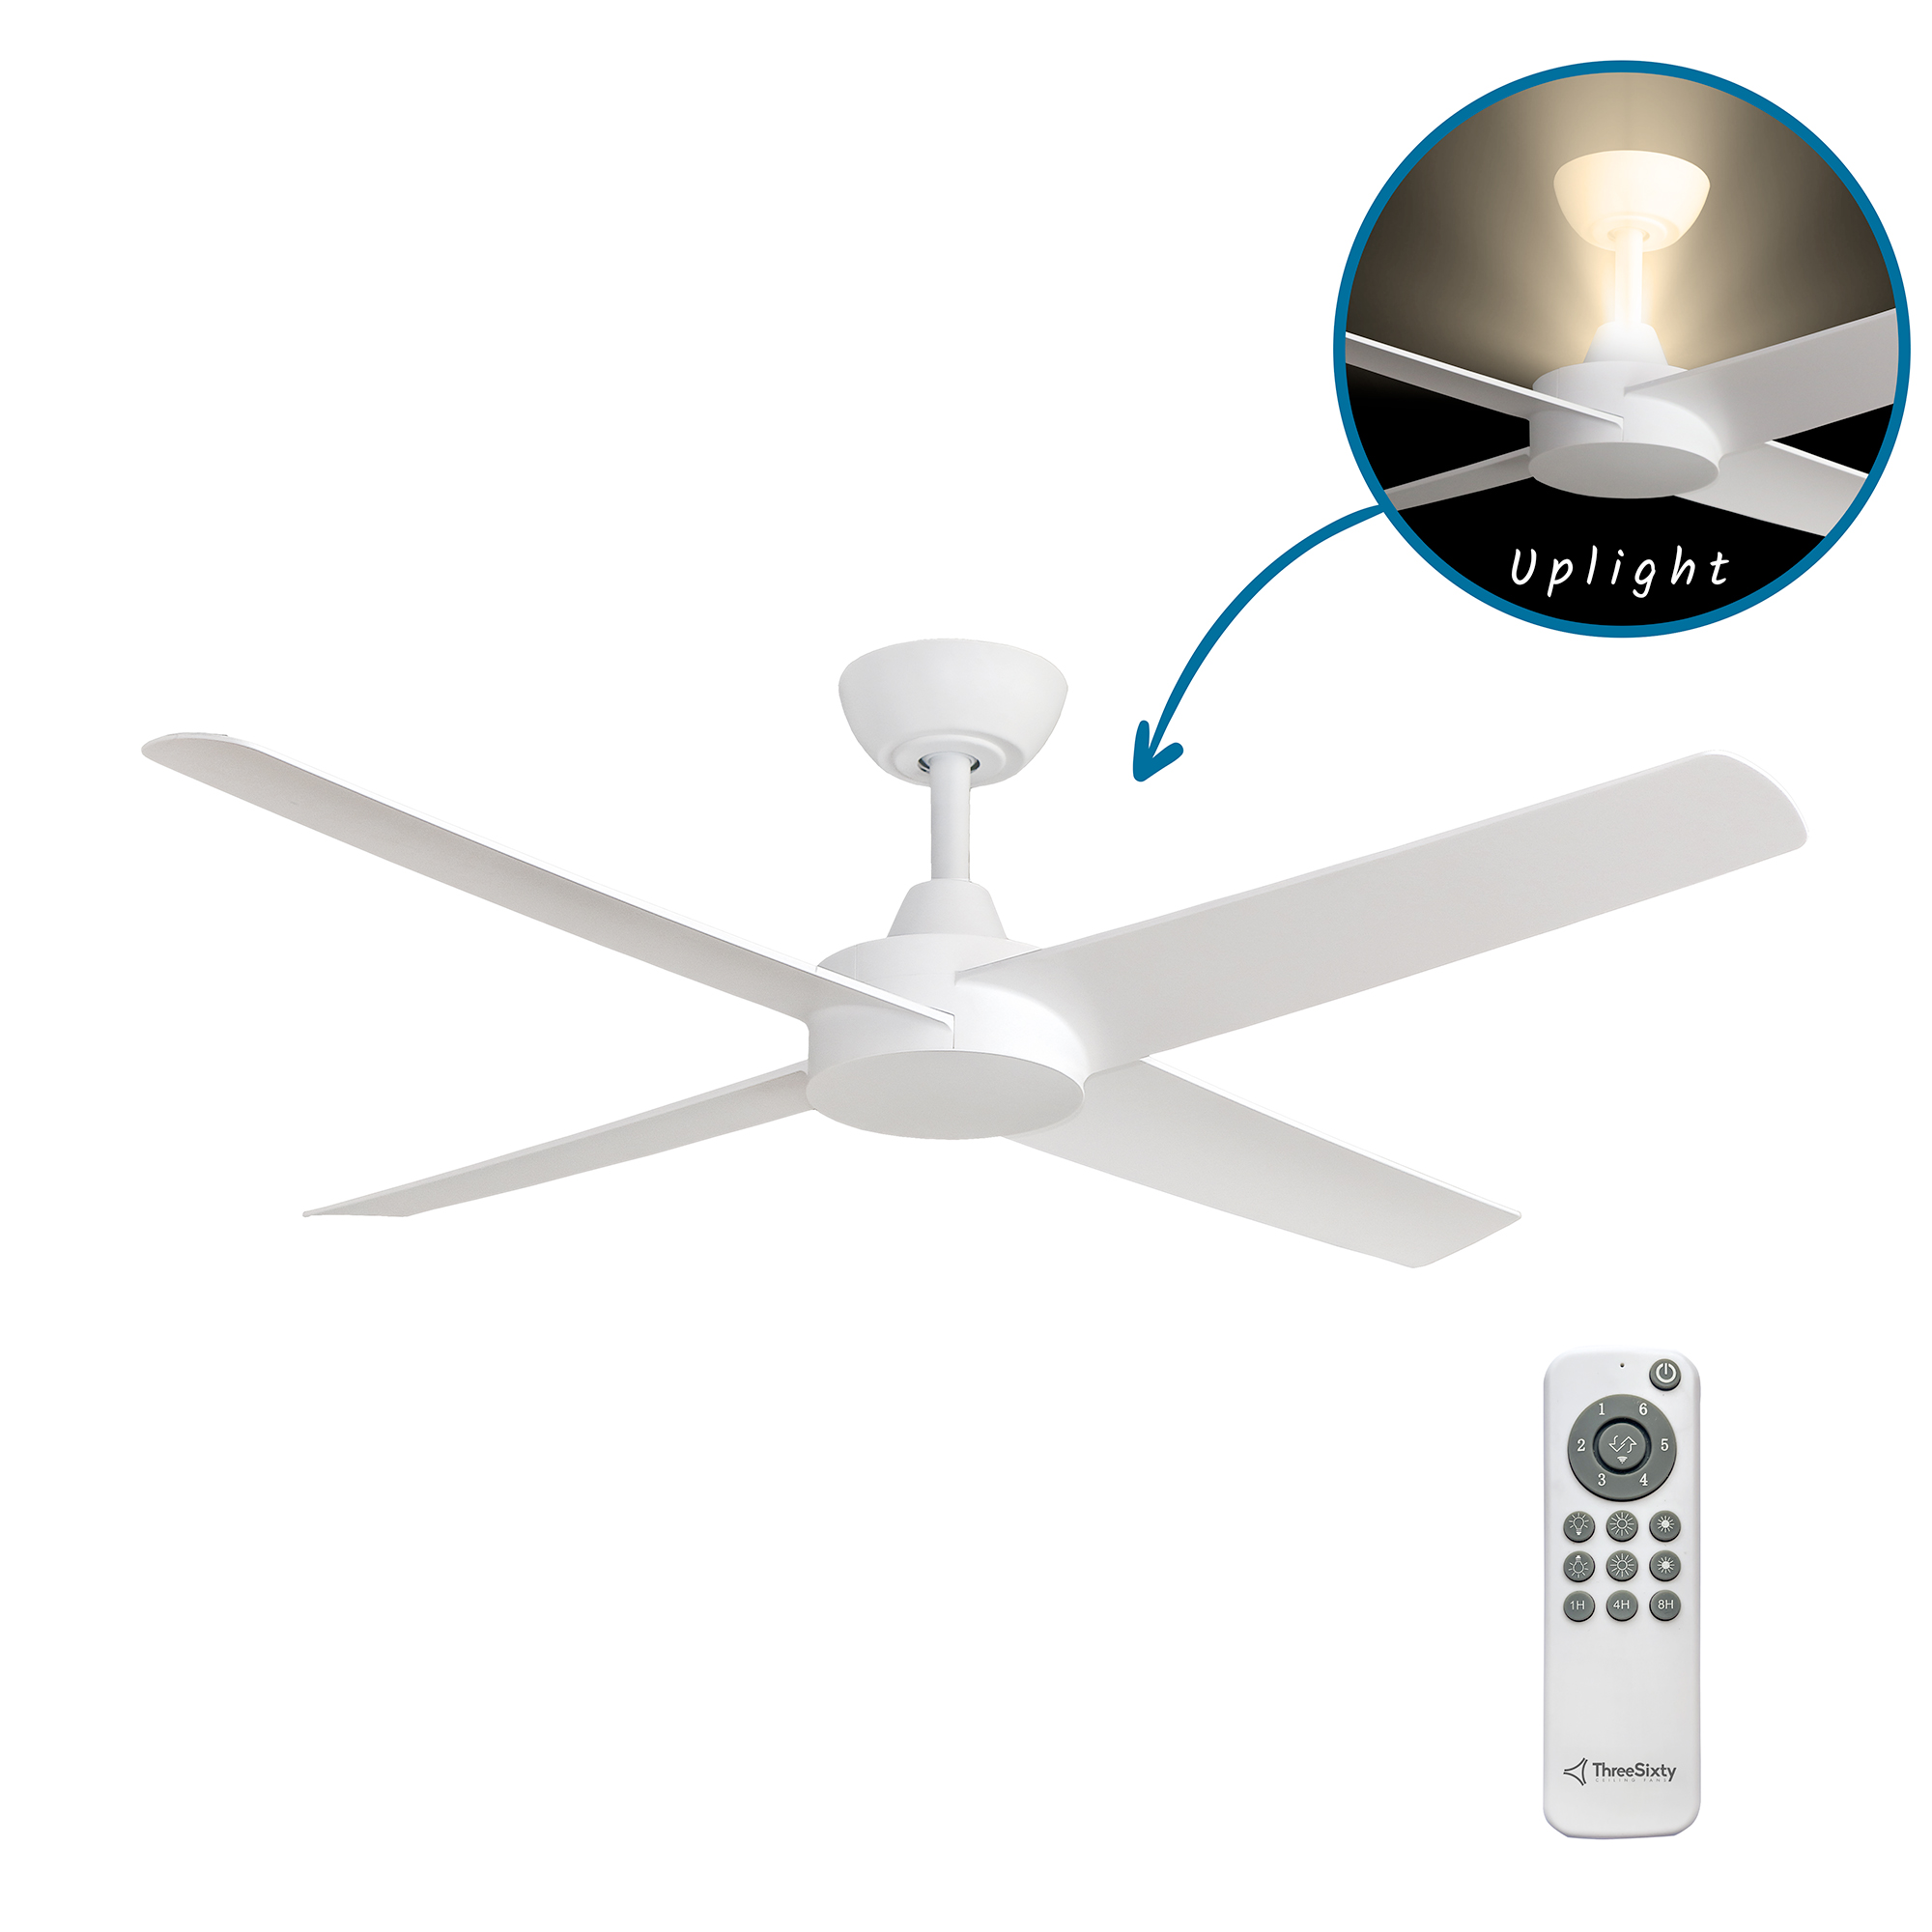 48" Ambience DC Ceiling Fan in White with Built-in Uplight